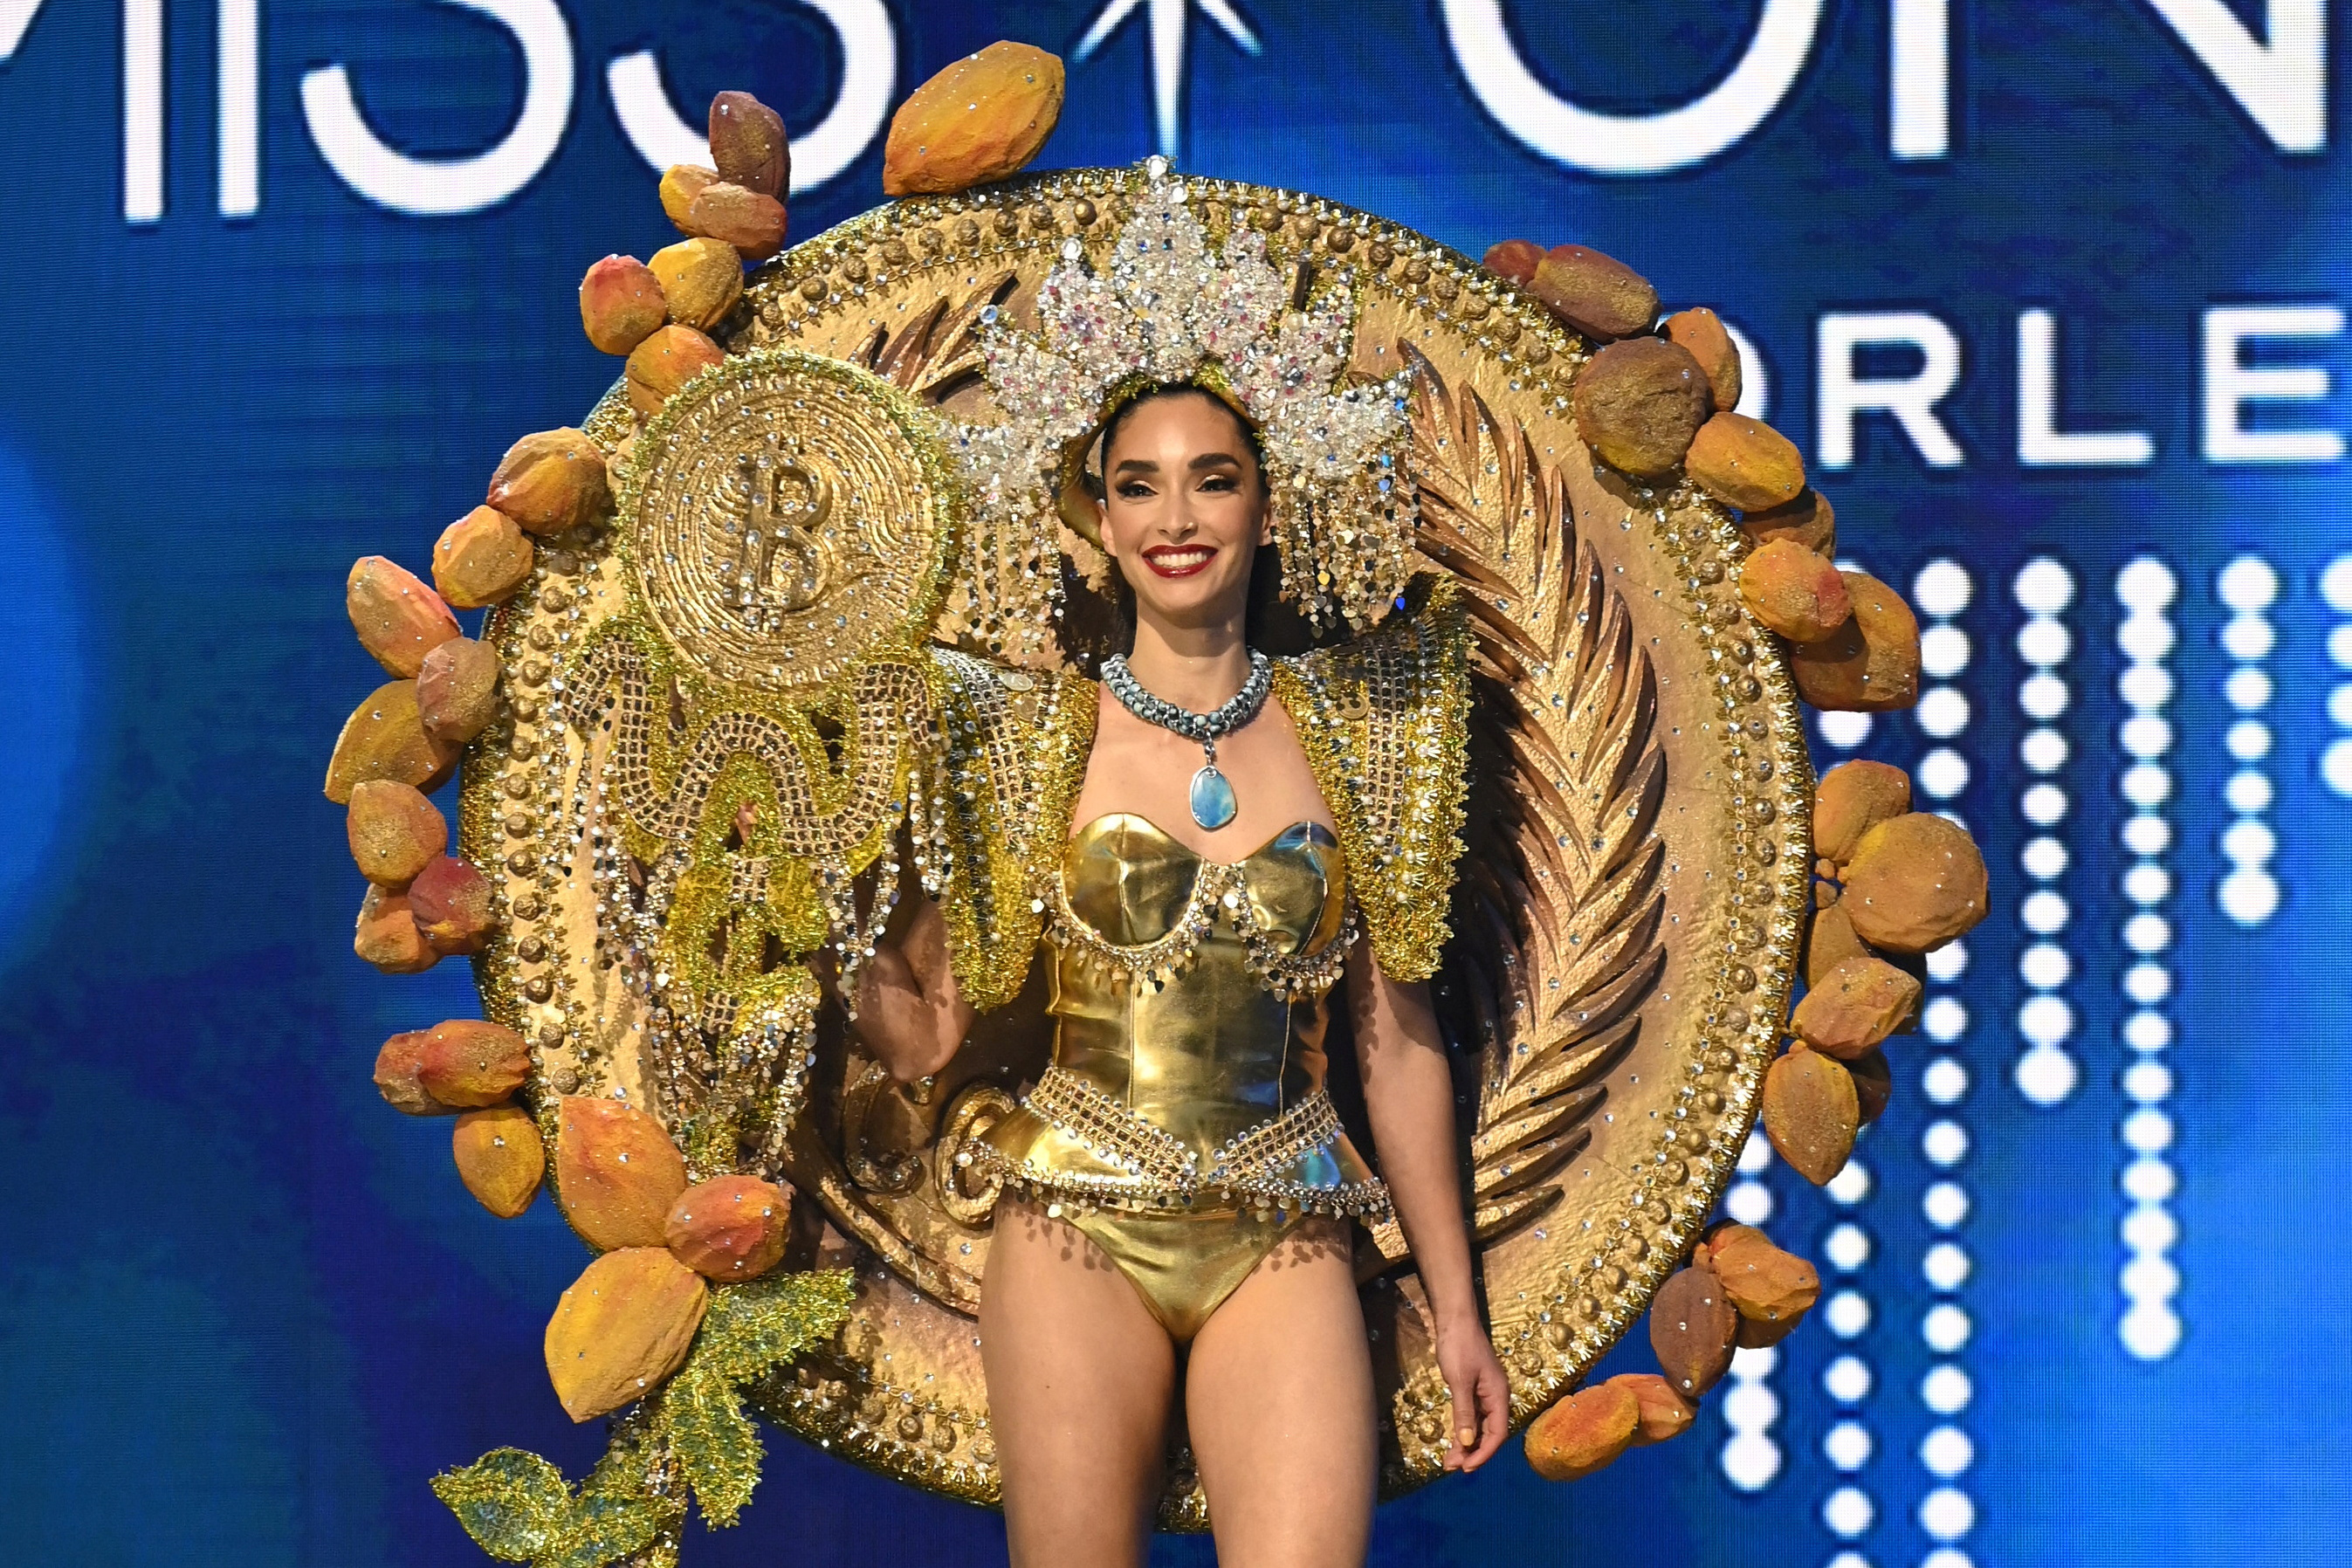 Alejandra Guajardo, Miss Universe El Salvador 2022 poses on stage in an outfit inspired by the country's use of Bitcoin as a currency